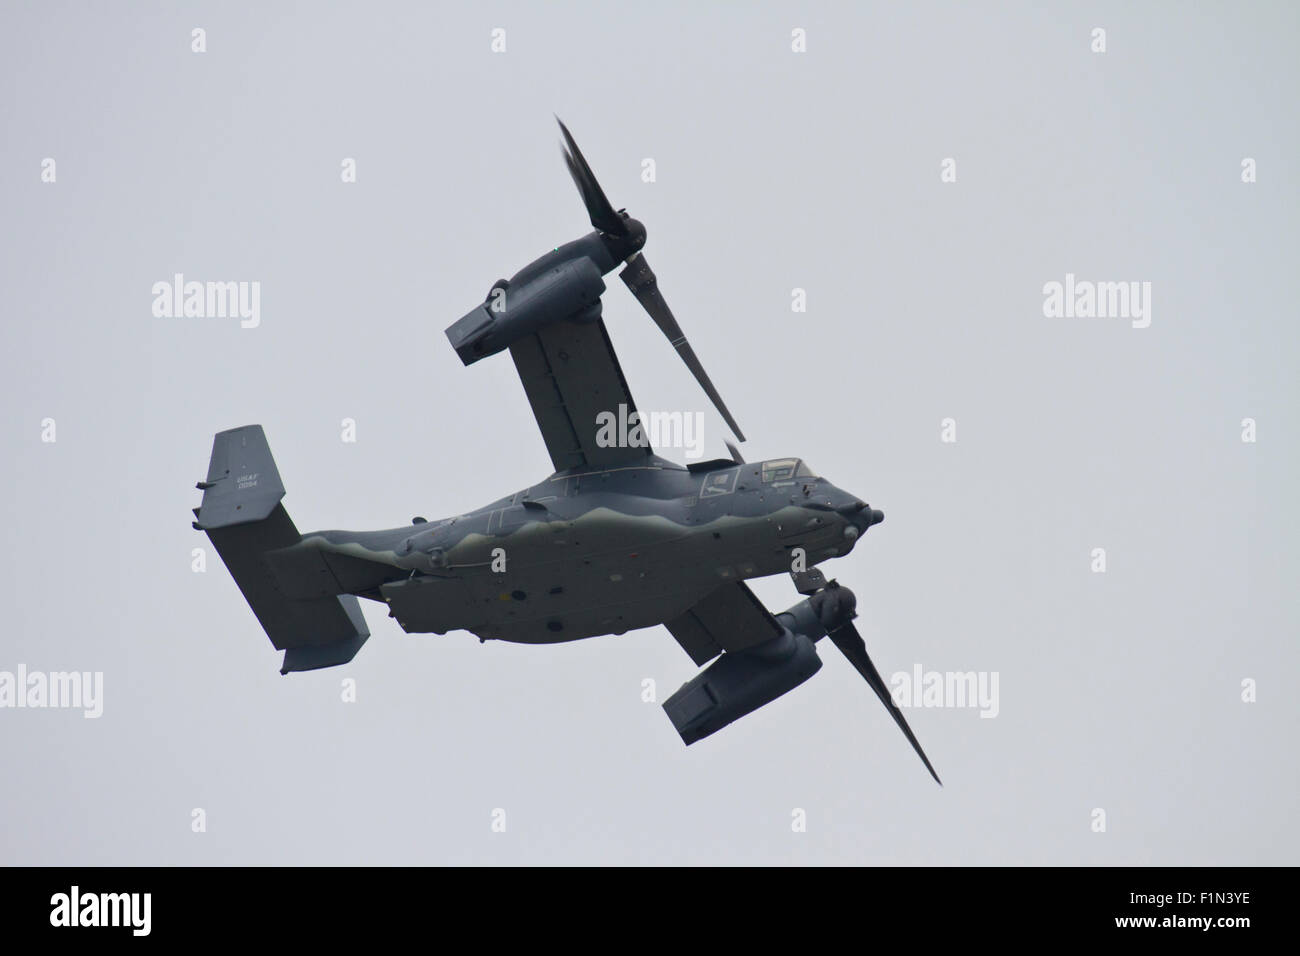 Underside view of a Bell Boeing V-22 Osprey Military aircraft flying overhead Stock Photo